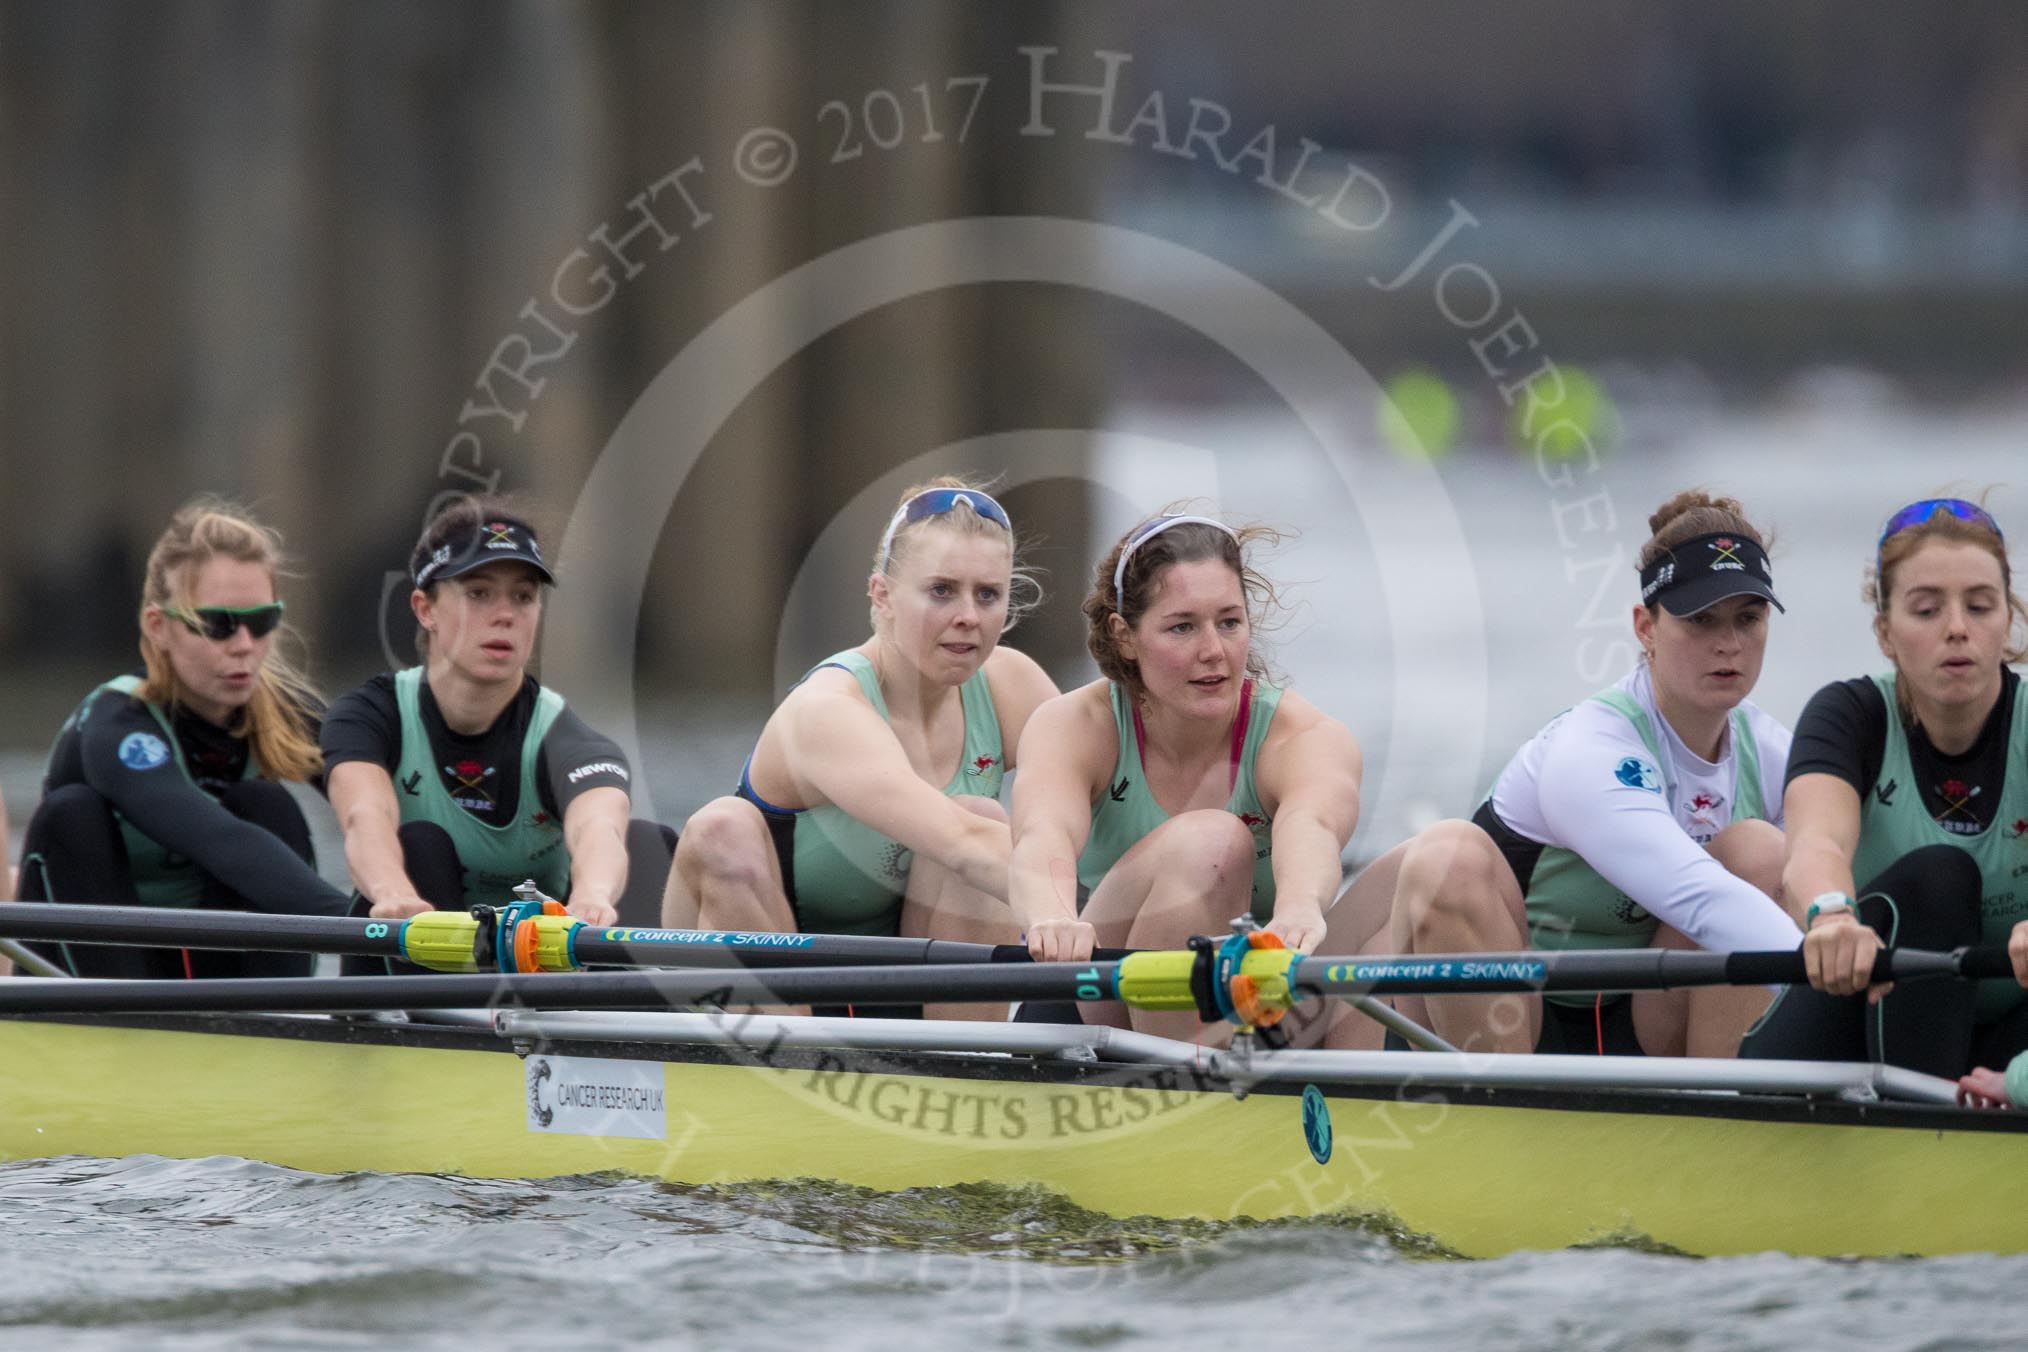 The Boat Race season 2017 - Women's Boat Race Fixture CUWBC vs Univerity of London: The CUWBC eight before the start of the race, 3 - Ashton Brown, 4 - Imogen Grant, 5 - Holy Hill, 6 - Melissa Wilson, 7 - Myriam Goudet, stroke - Alice White.
River Thames between Putney Bridge and Mortlake,
London SW15,

United Kingdom,
on 19 February 2017 at 15:58, image #50